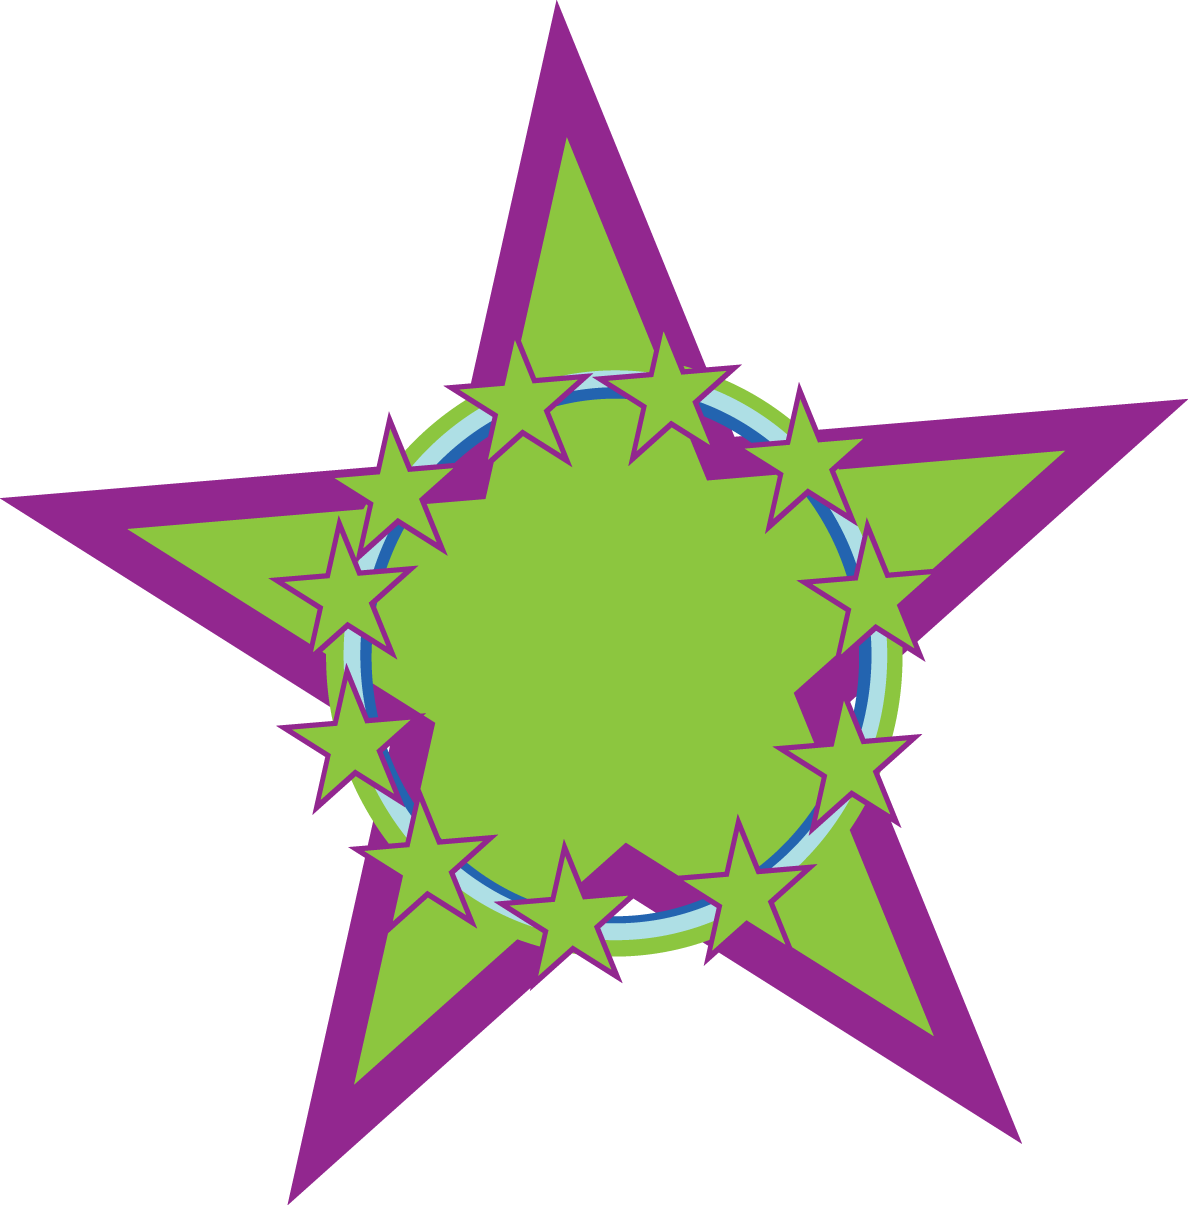 Rainbow stars clipart free clipart images clipartix